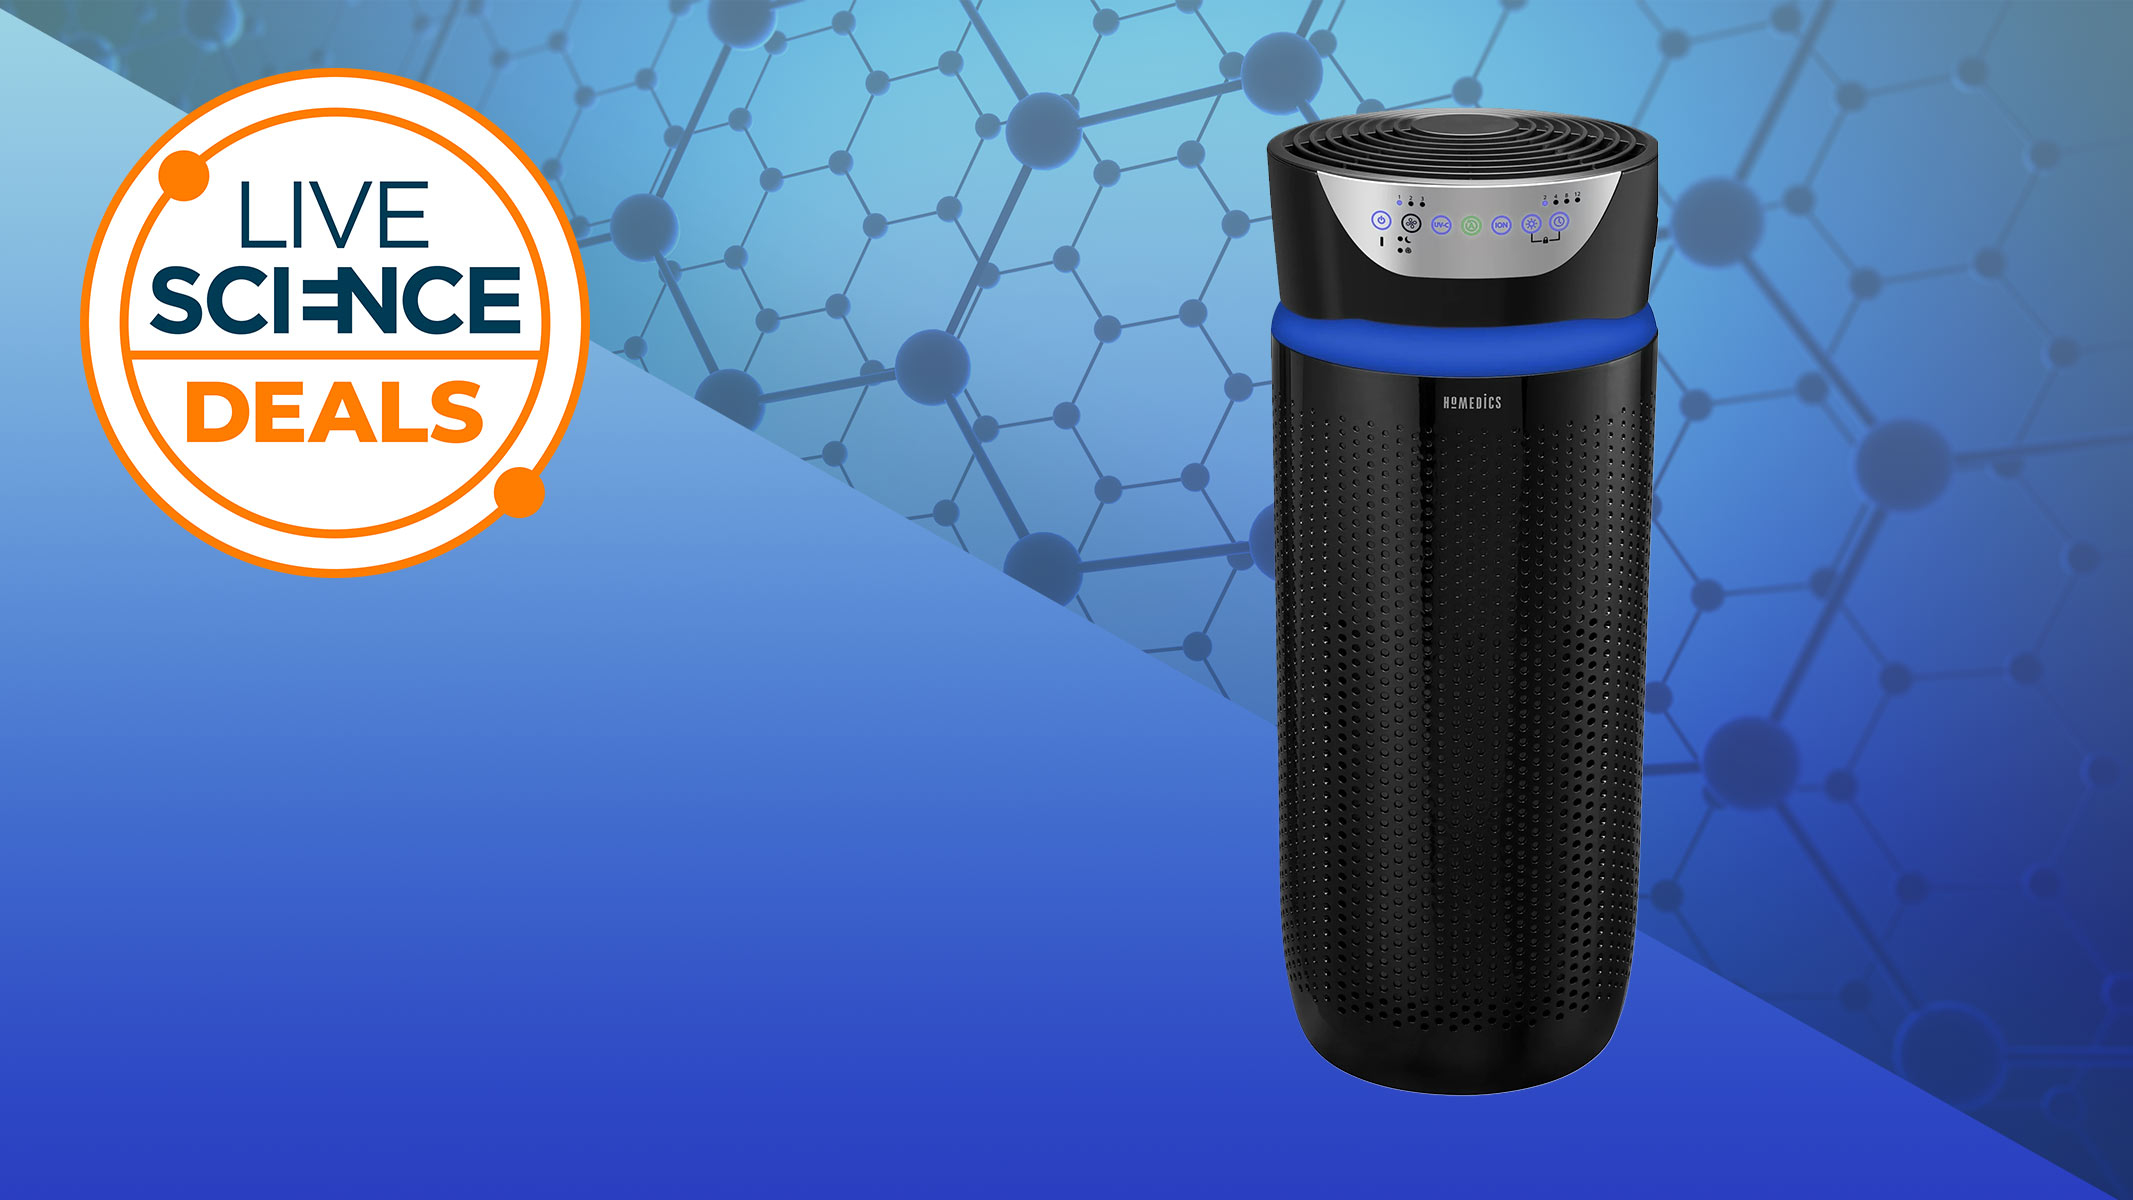  Save a huge 40% on one of the best air purifiers 